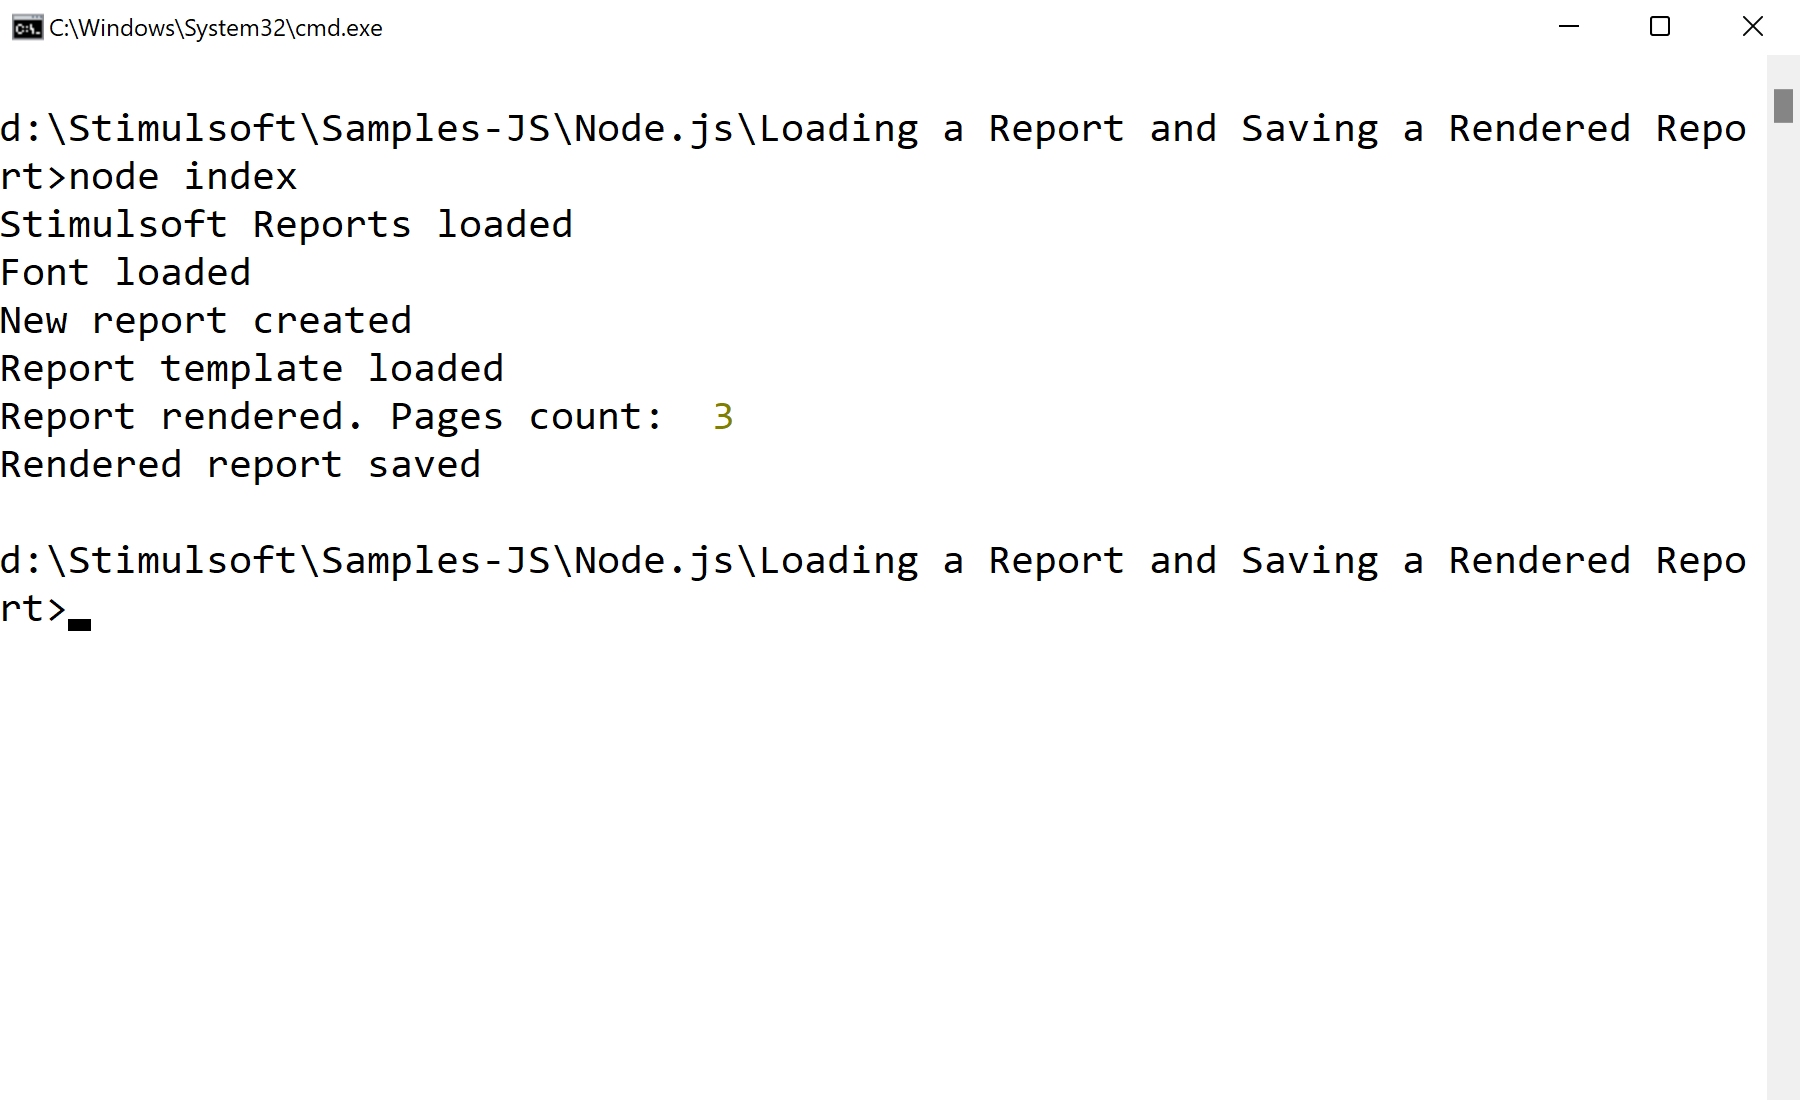 Loading a Report and Saving a Rendered Report